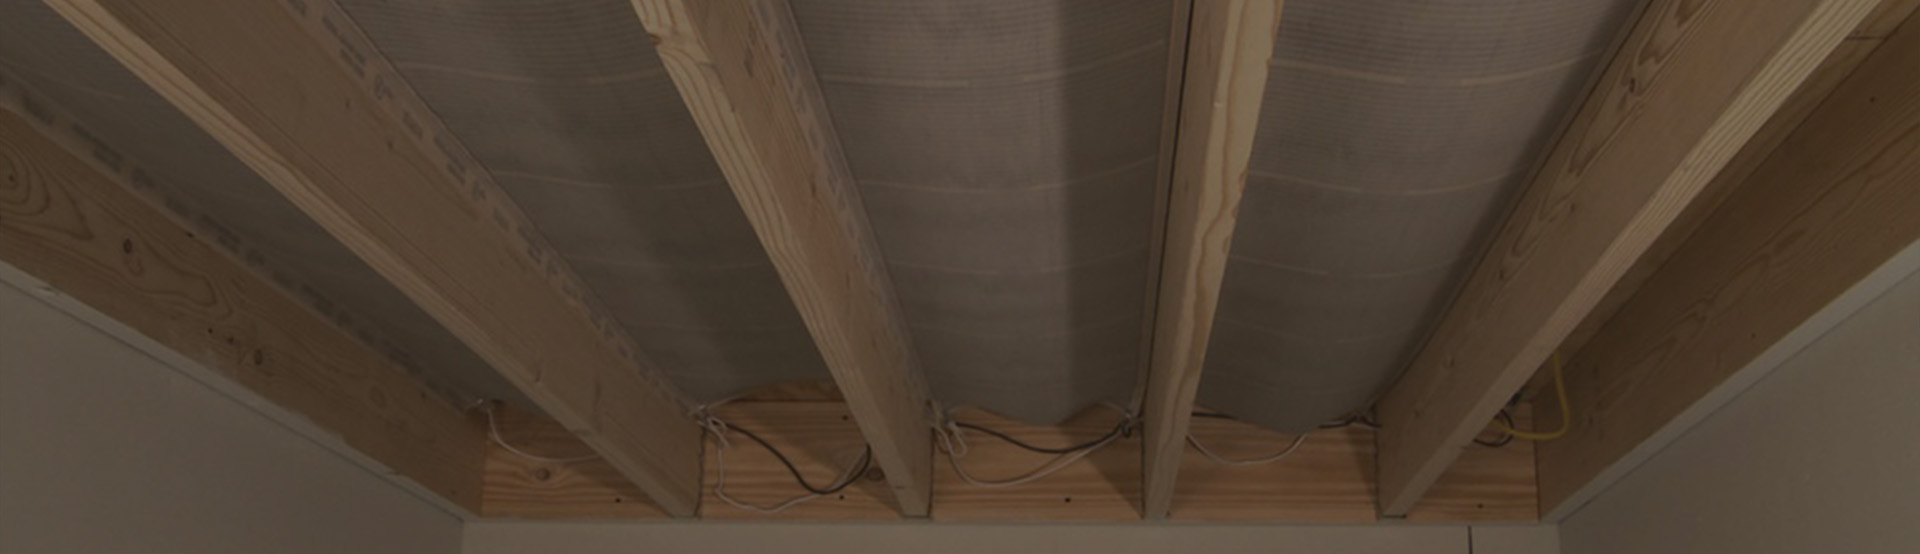 RetroHeat radiant heat system for heating existing floors banner